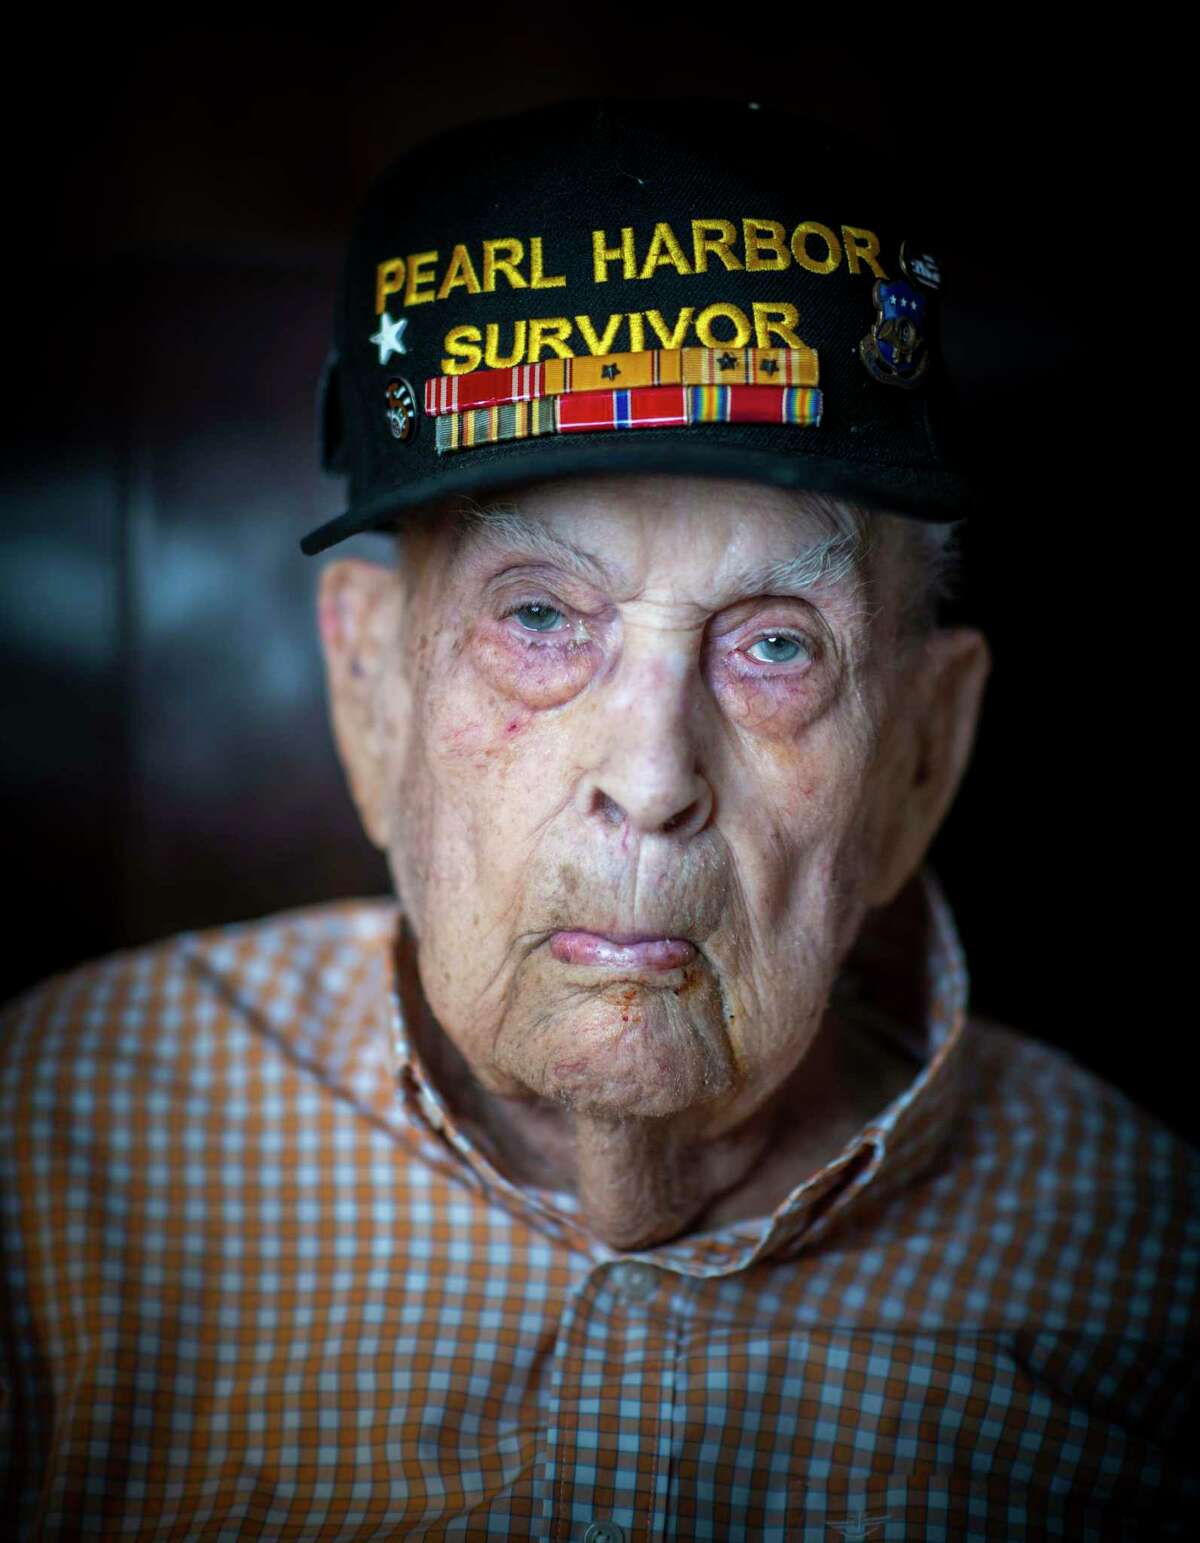 Pearl Harbor veteran Kenneth Platt is photographed during his 101st birthday celebration at his home in San Antonio on Sunday, May 15th, 2022.